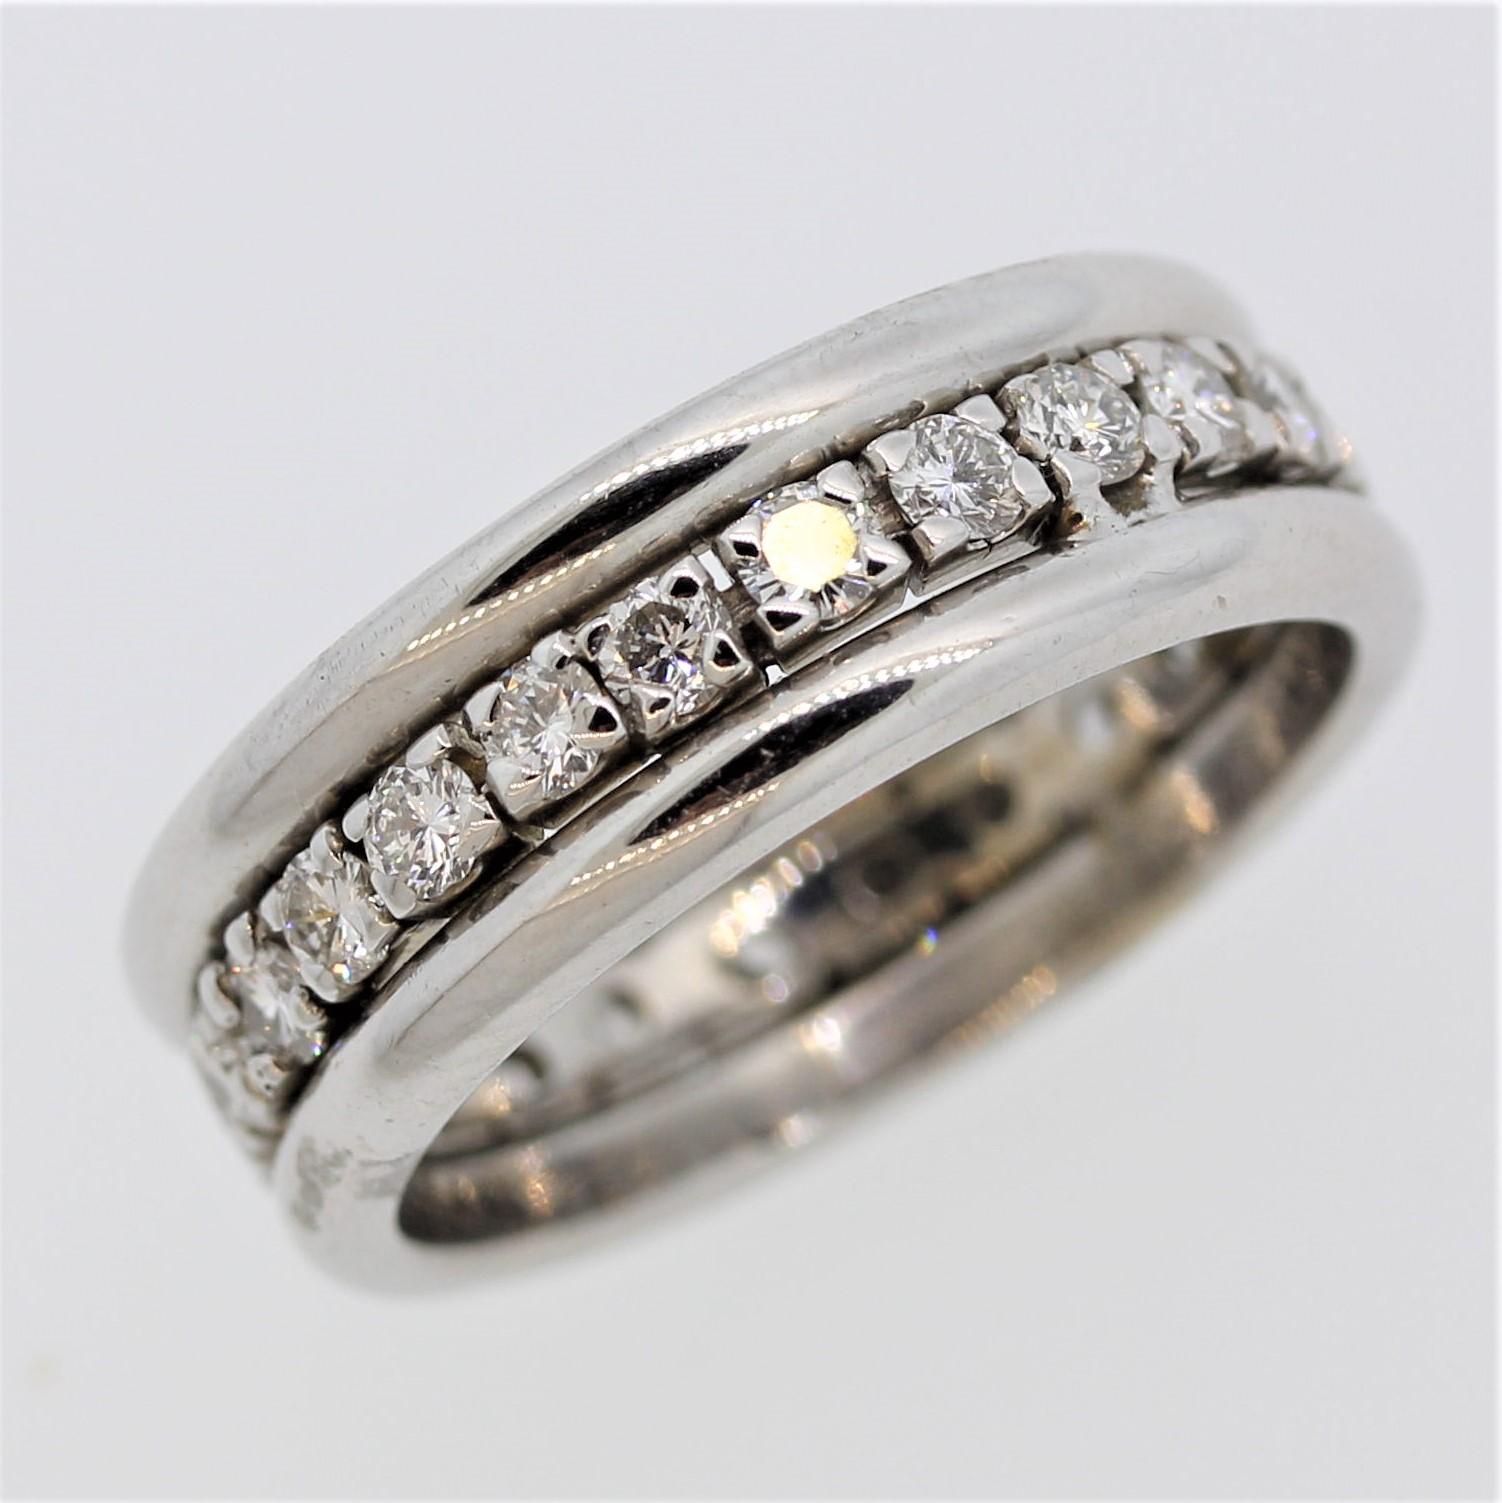 A unique styled eternity band. It features 1.50 carats of round brilliant cut diamonds set around the entirety of the ring. Made in 14k white gold.

Ring Size 7.75